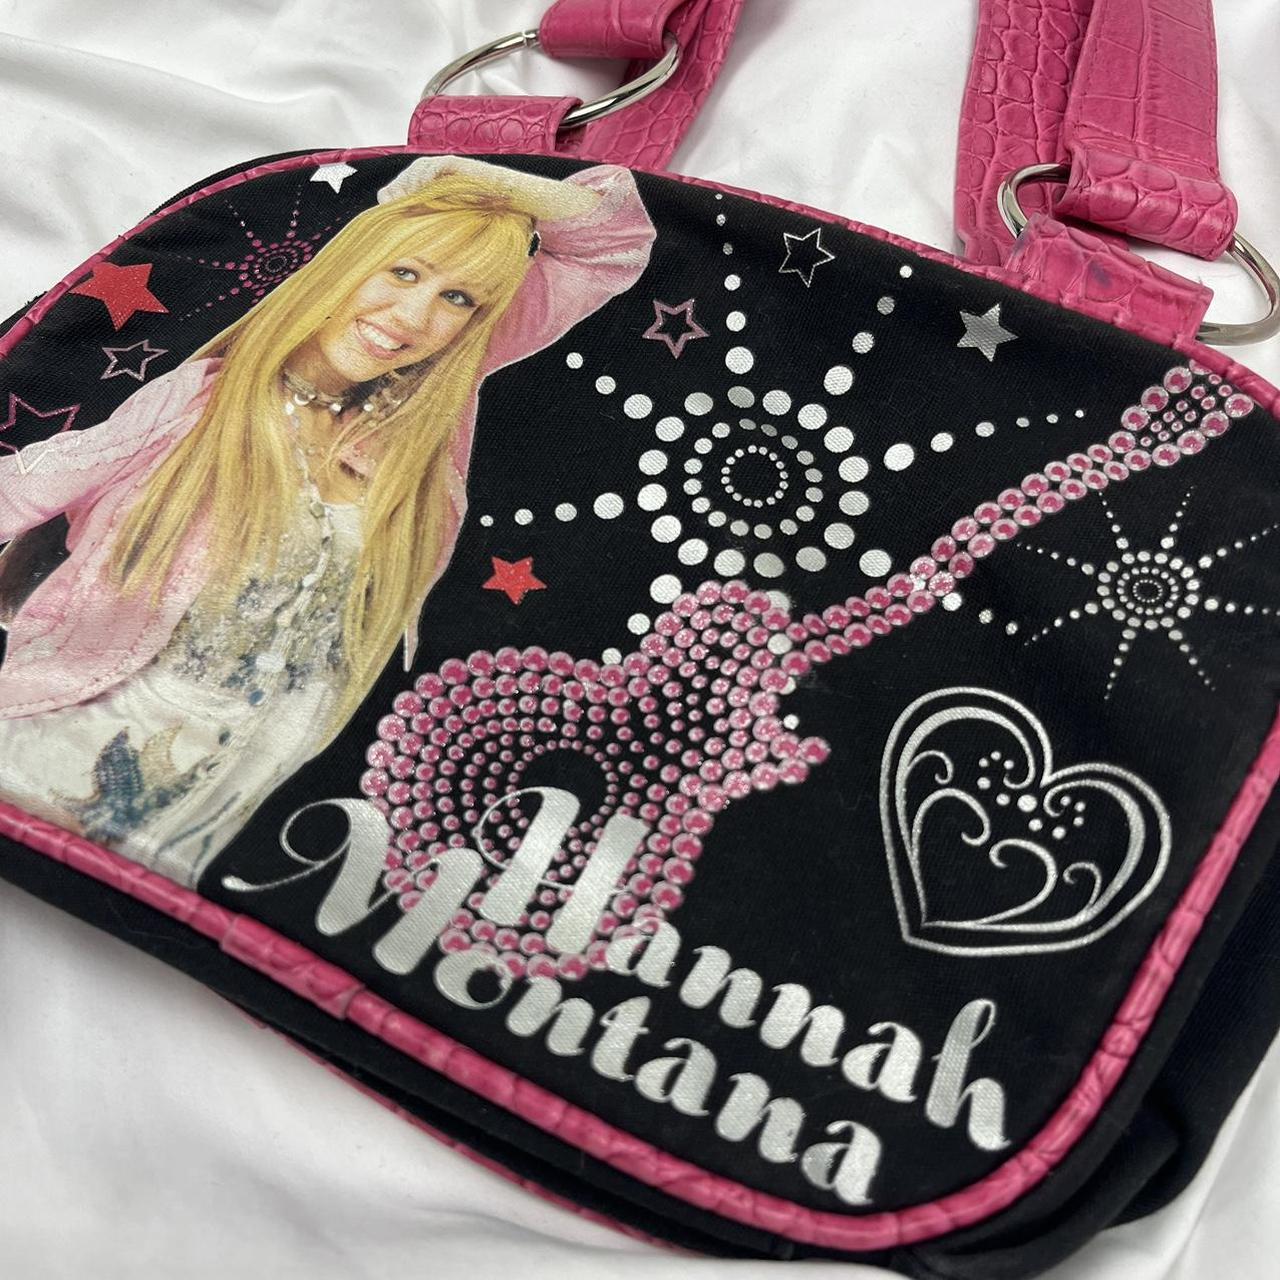 Hannah Montana Character Authentic Licensed Hot Pink Mini Shoudler Bag